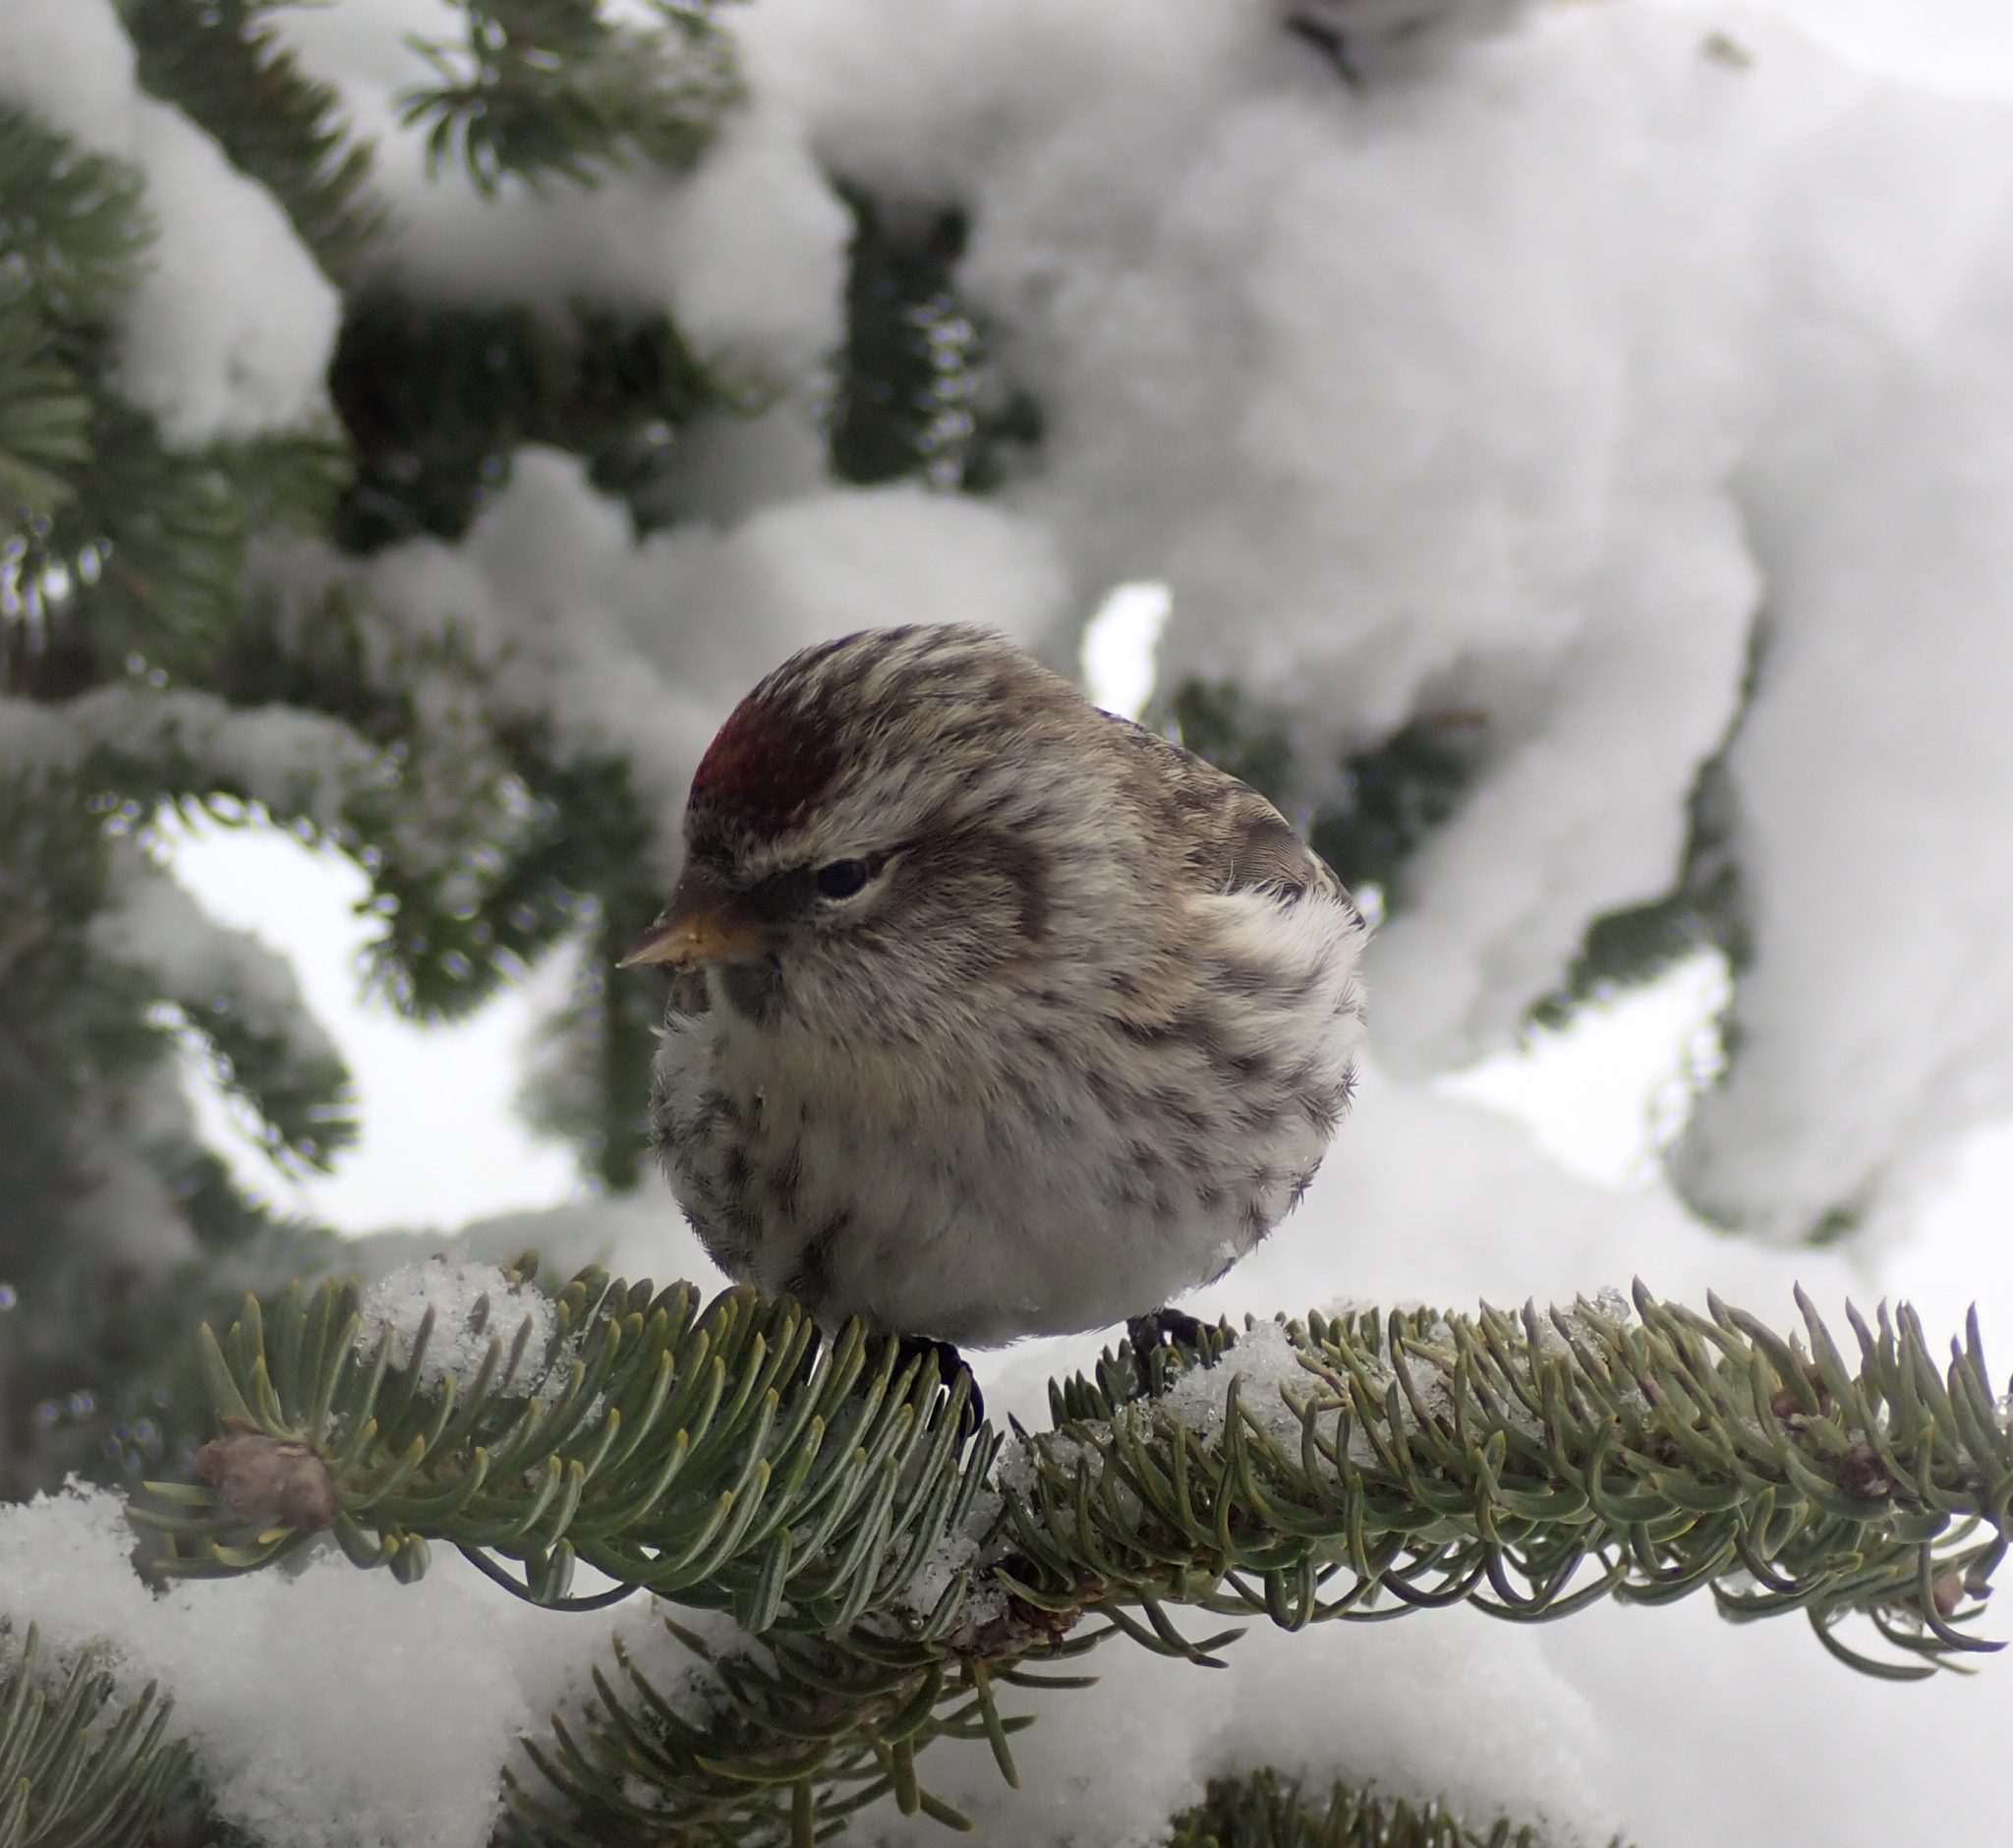 Redpoll (smallbrown and white bird with reddish patch on forehead, type of , finch) perches on a snowy spruce branchlet.